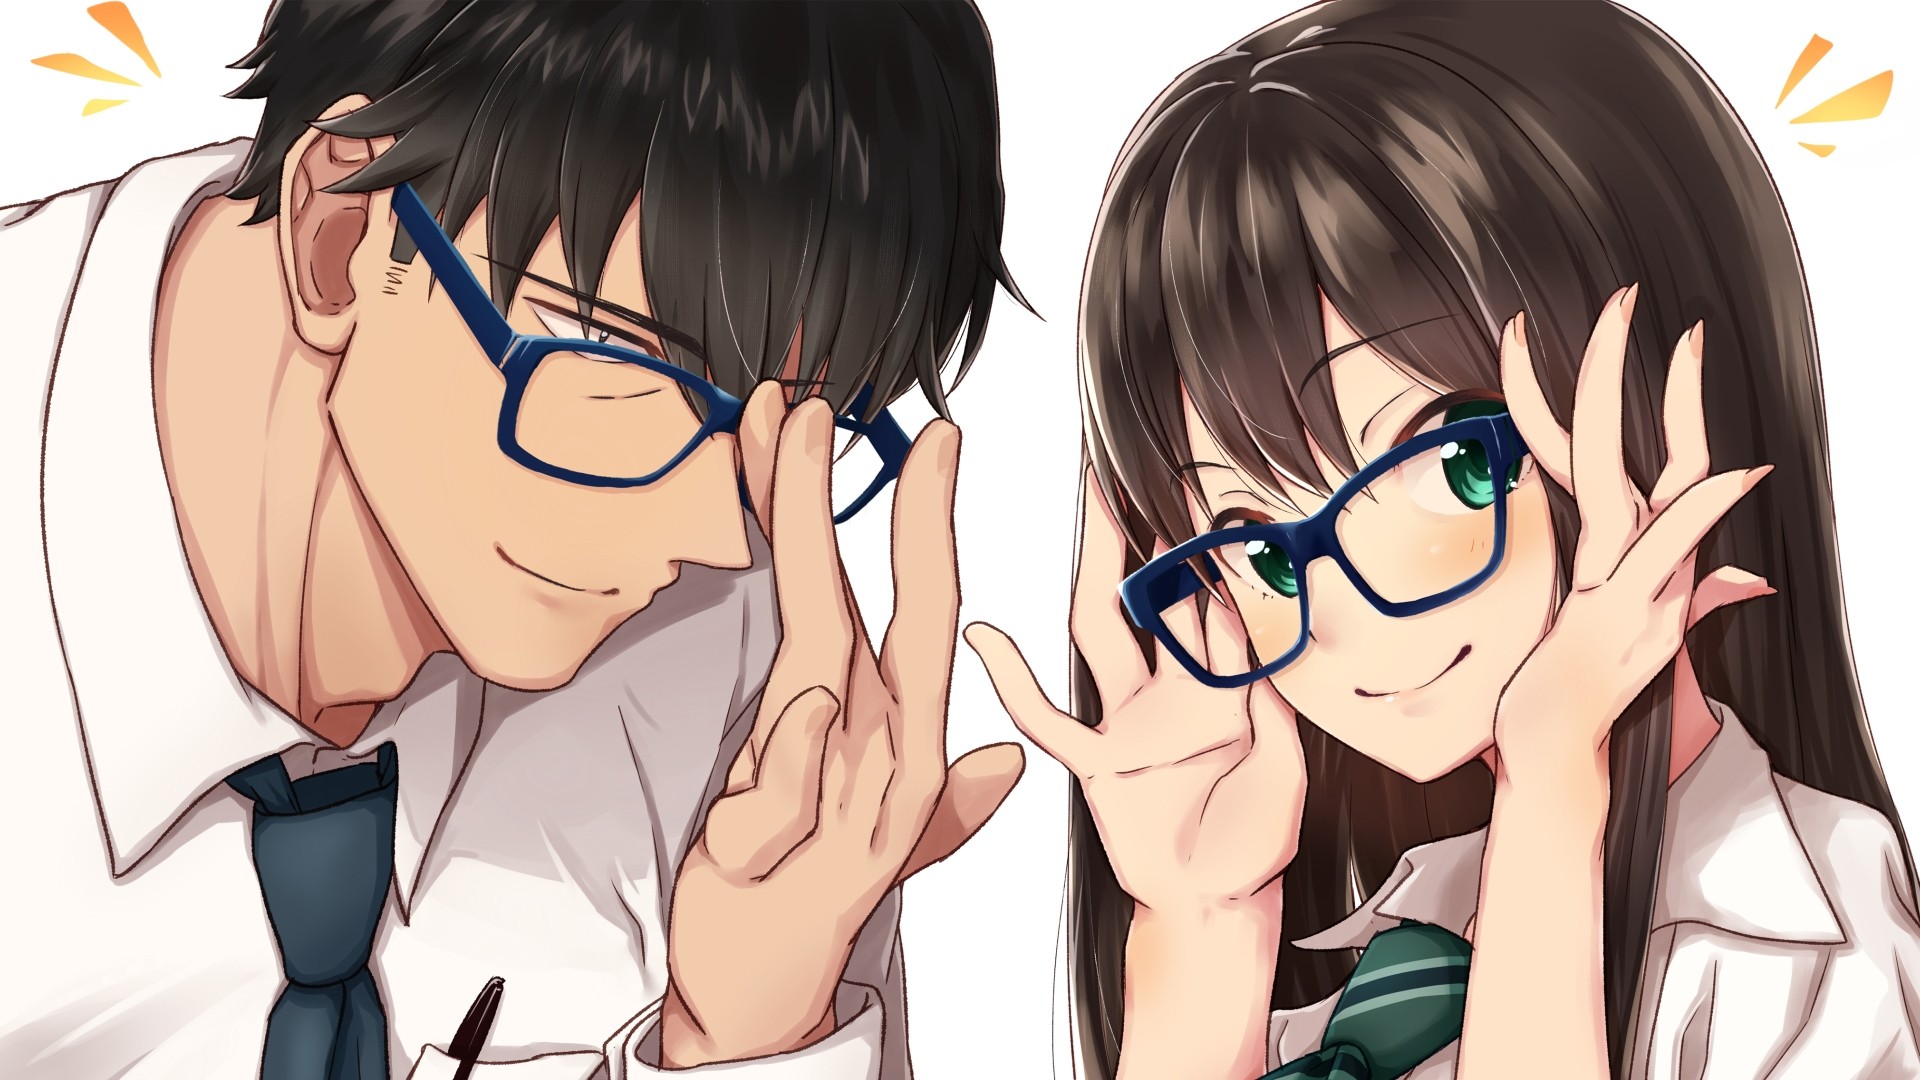 Anime Girl With Glasses a wallpaper